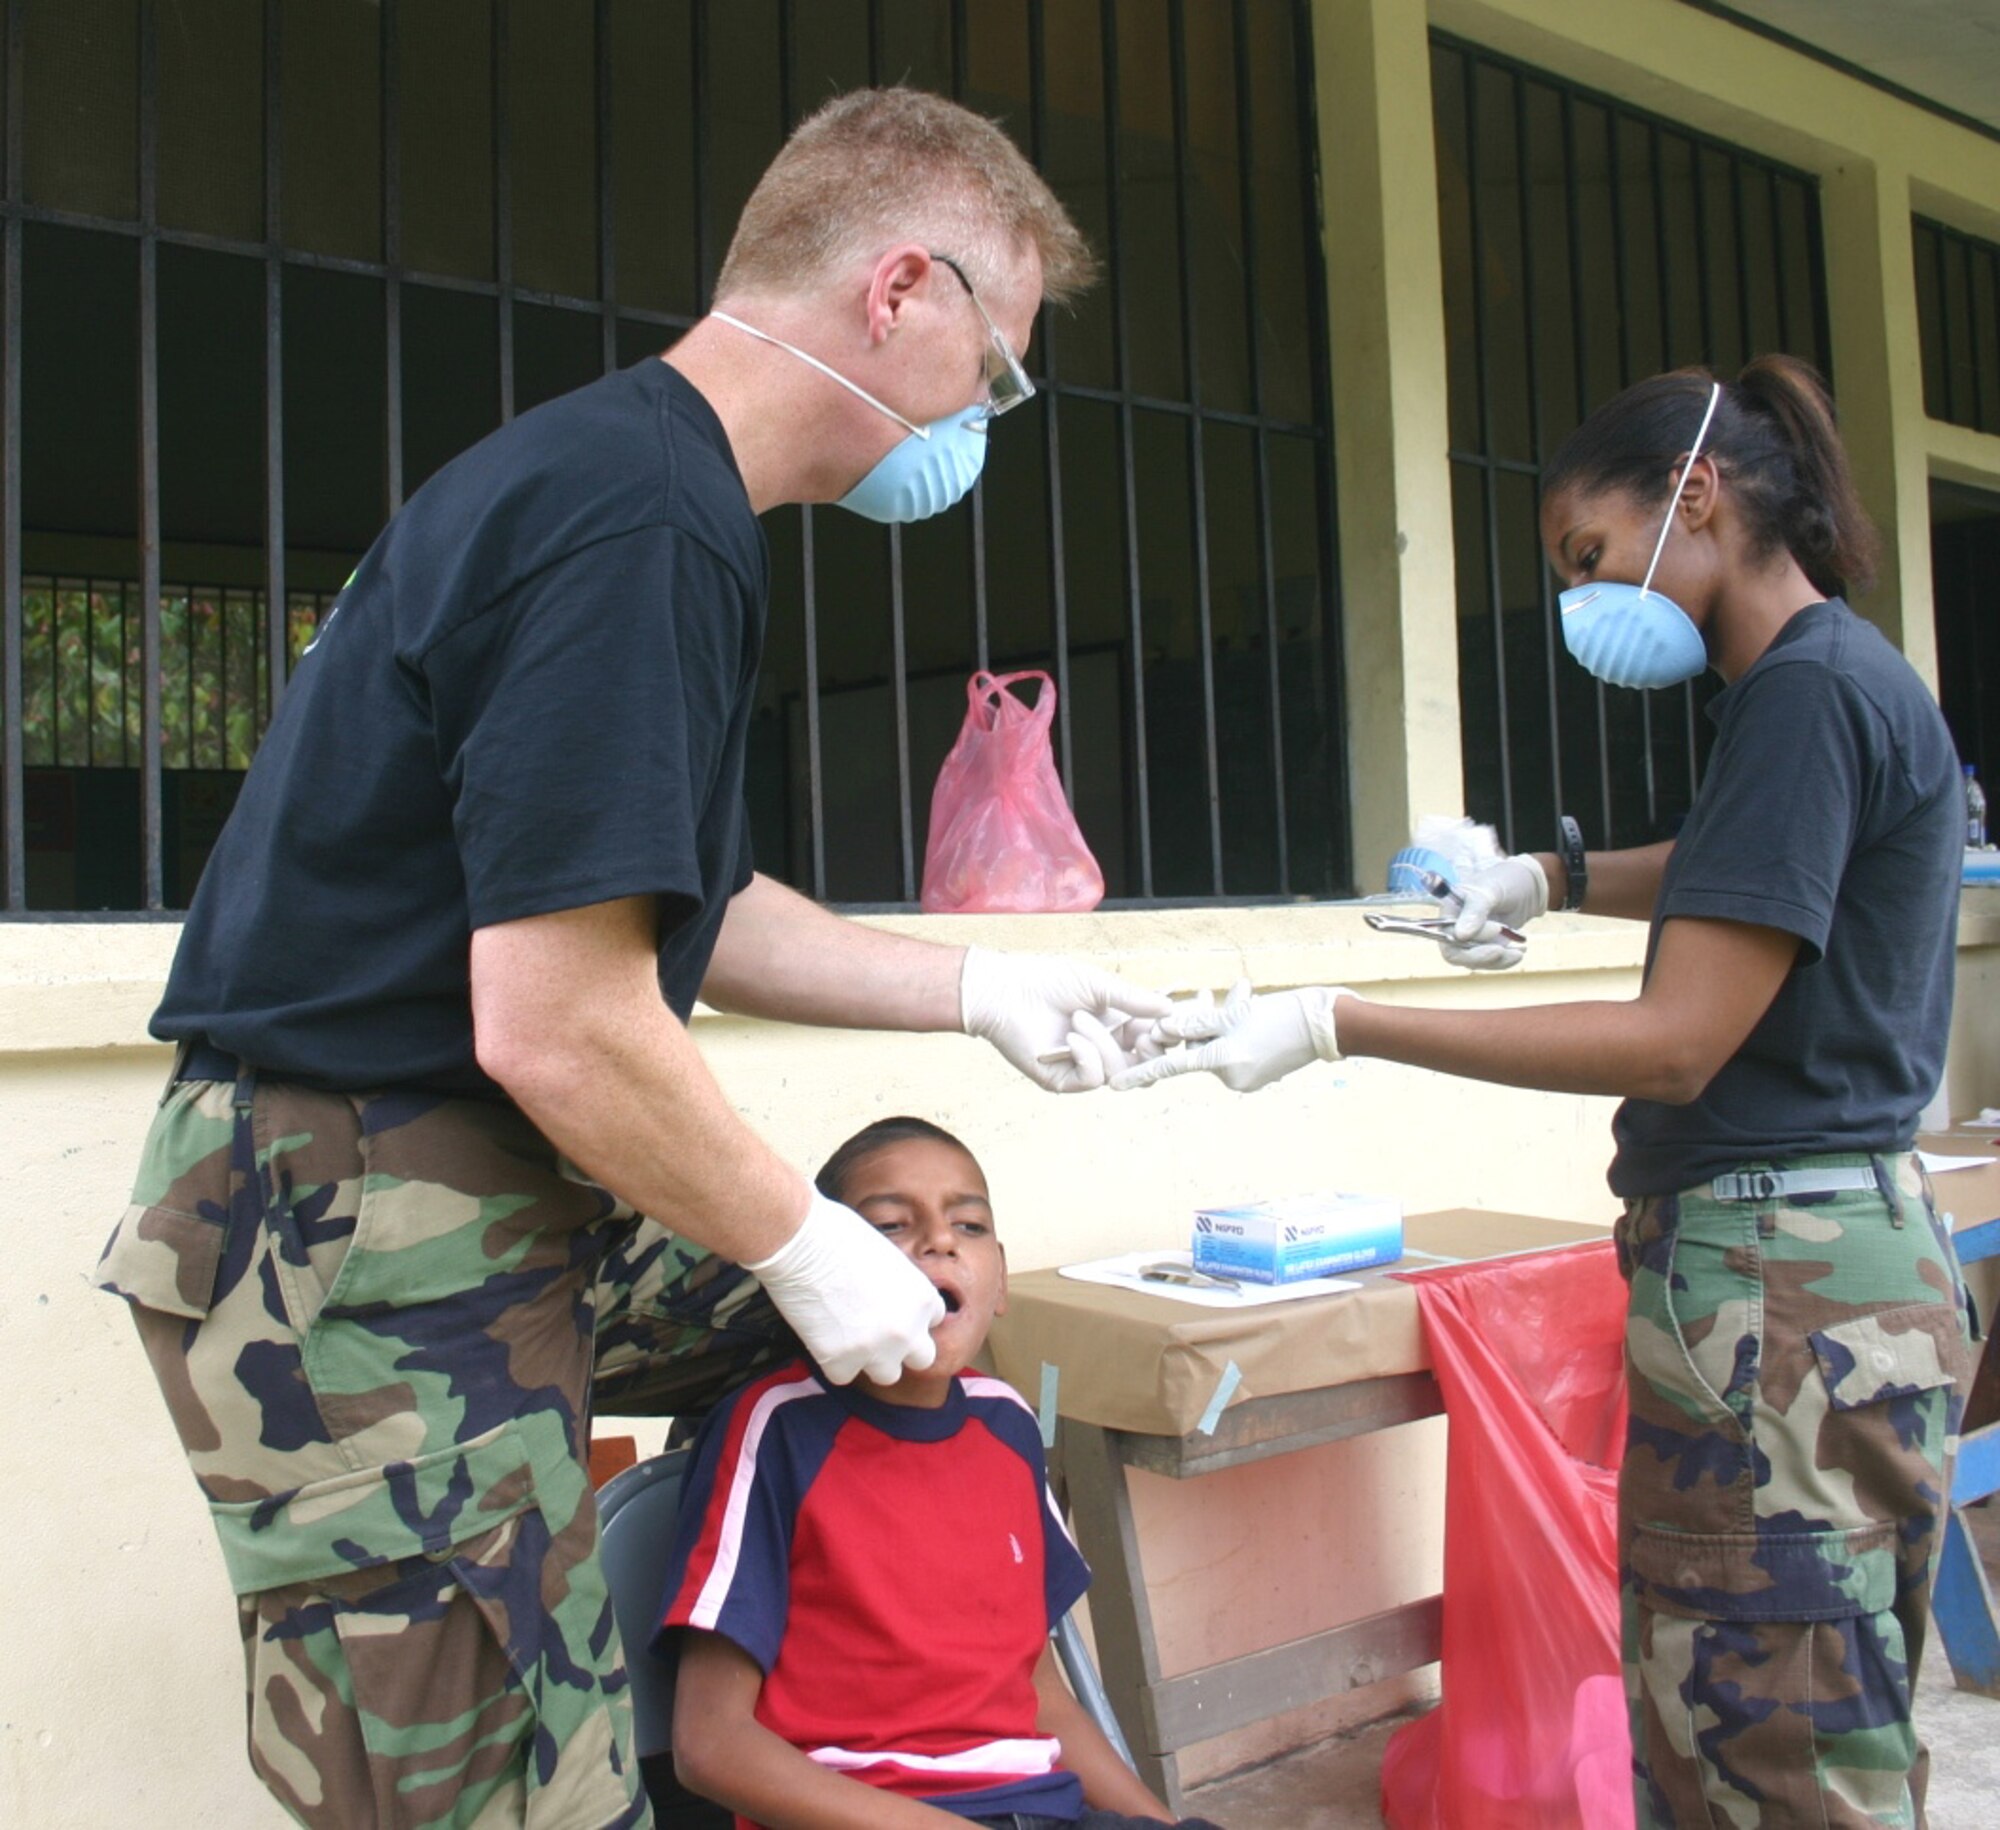 Staff Sgt. Monique Fontenot, dental technician, hands dental instruments to Lt. Col. (Dr.) Mark Means as he prepares to extract a Honduran boy's tooth. The dental team saw about 100 patients at the medical readiness training exercise site in El Recreo, Honduras. Sergeant Fontenot and Colonel Means are both deployed from the 96th Dental Squadron at Eglin Air Force Base, Fla. (U.S. Air Force photo/Capt. Mike Chillstrom)